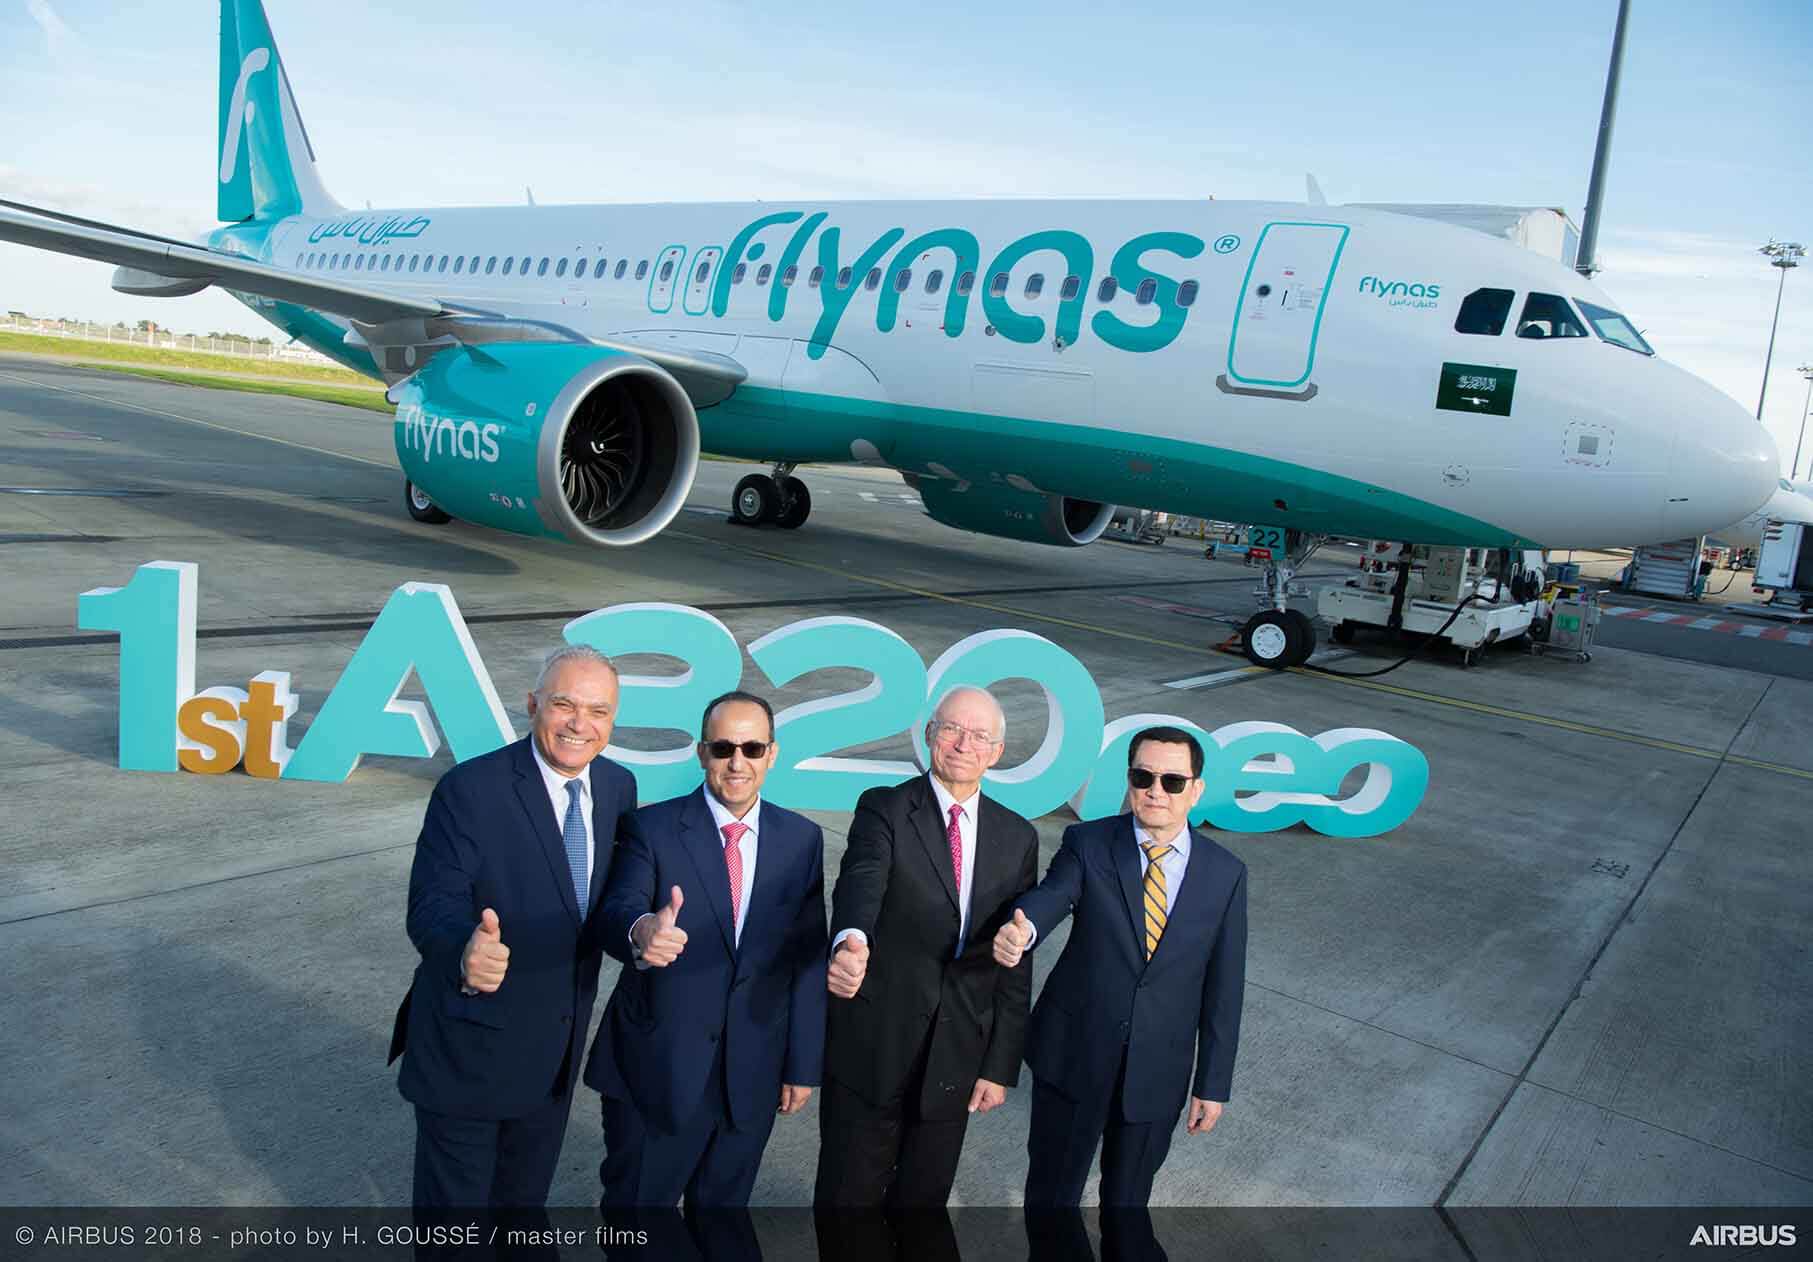 Flynas becomes first Saudi carrier to receive the A320neo